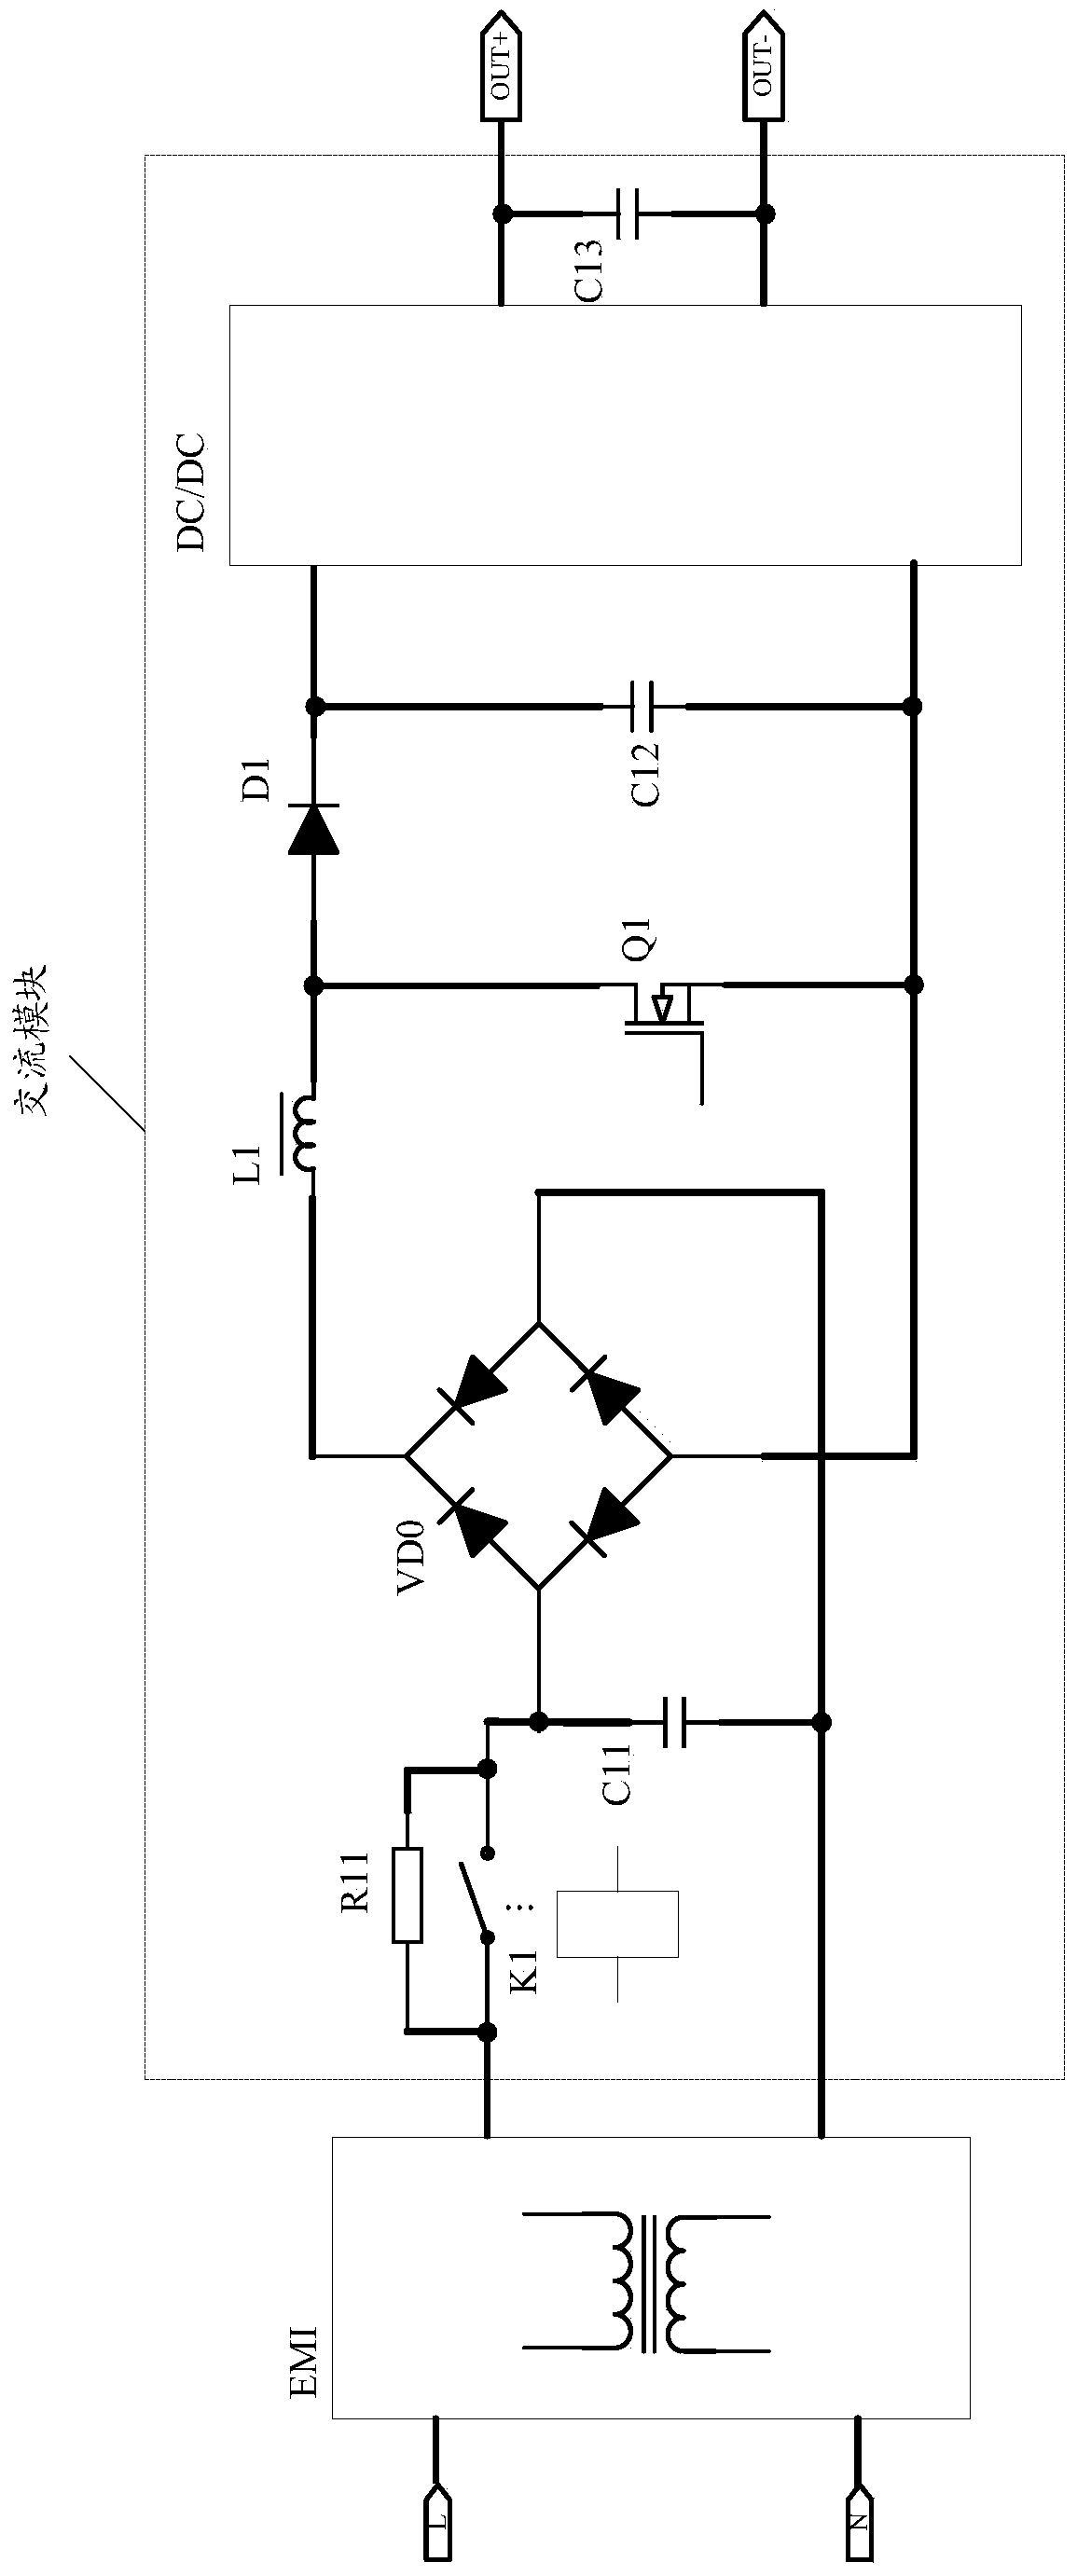 Drive circuits for thyristors and circuits for AC modules